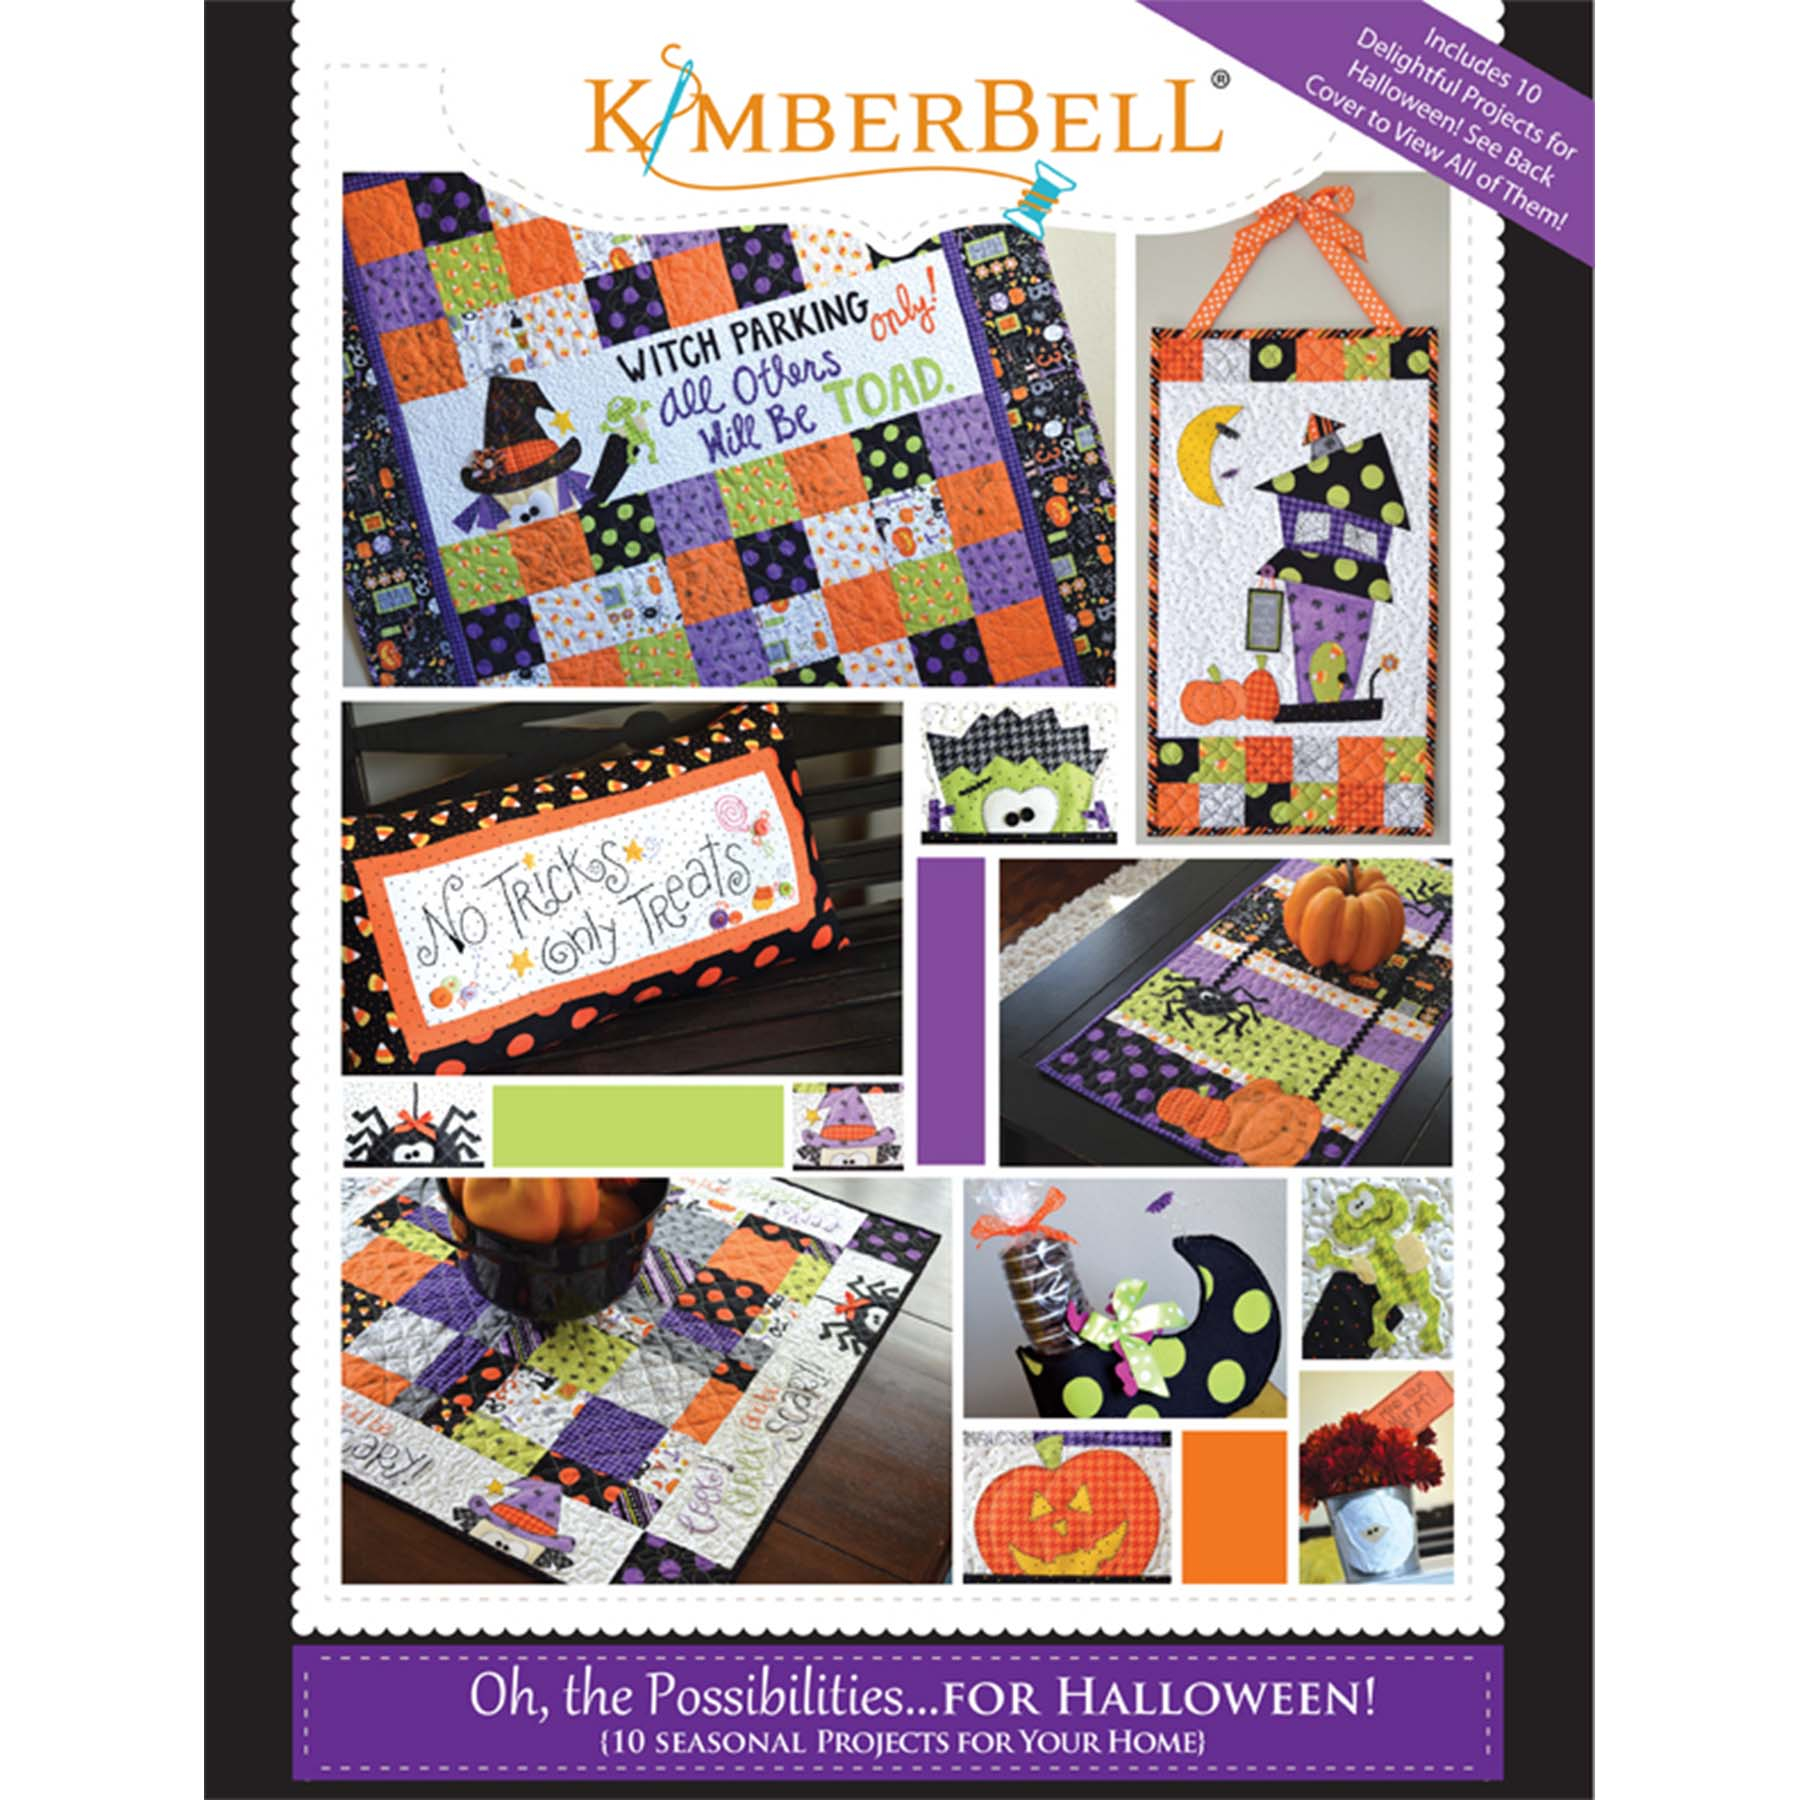 Halloween Hand Embroidery Patterns Oh The Possibilities For Halloween Kimberbell Designs